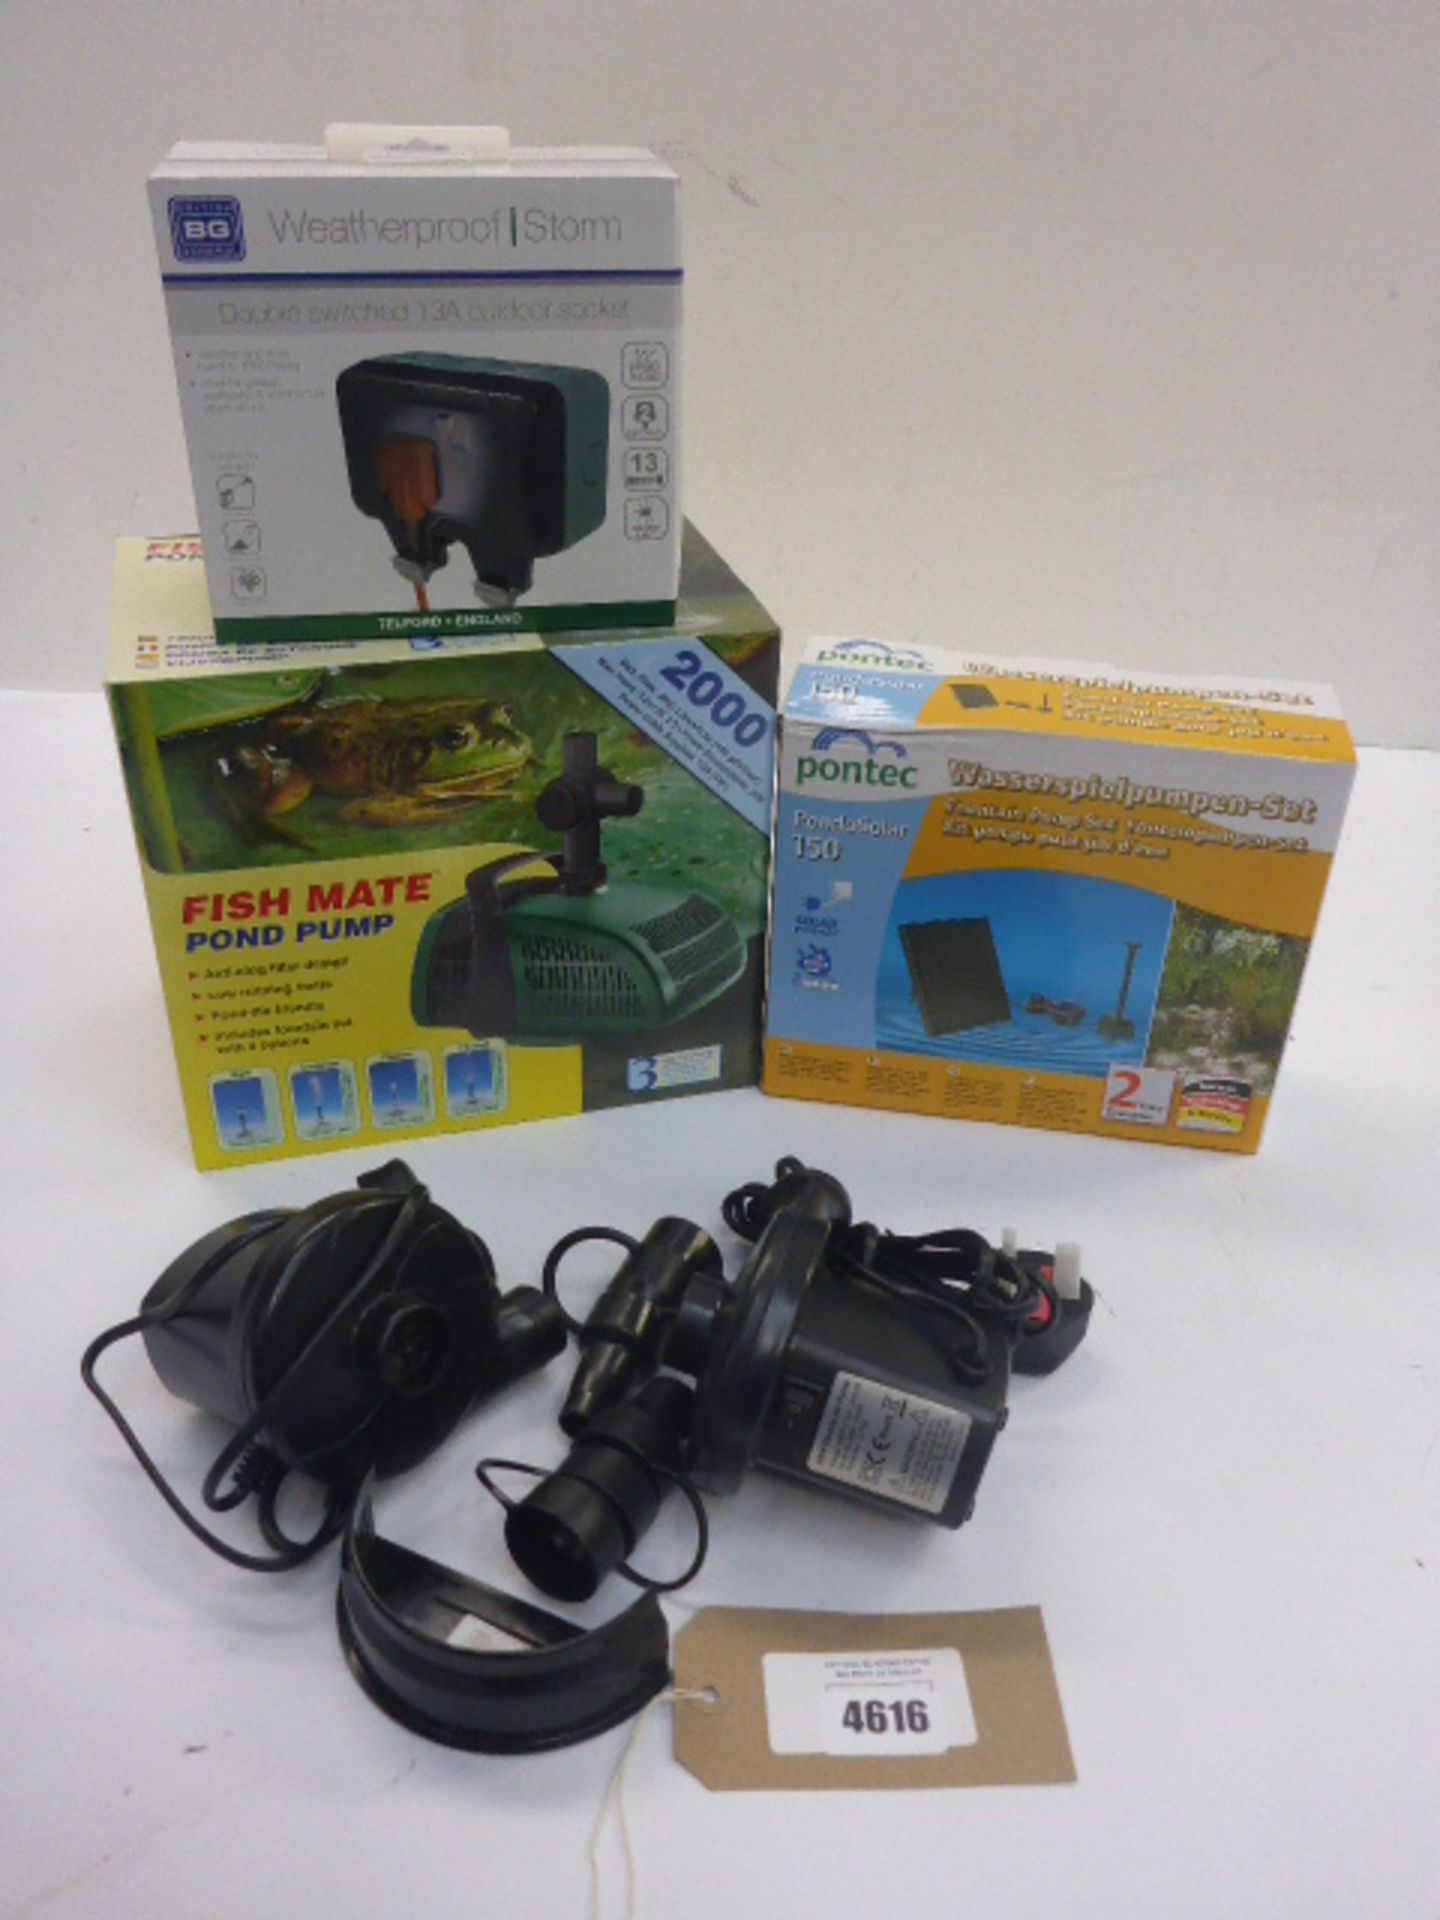 Fish Mate pond pump, Solar Pond fountain, outdoor double socket and 2 air pumps